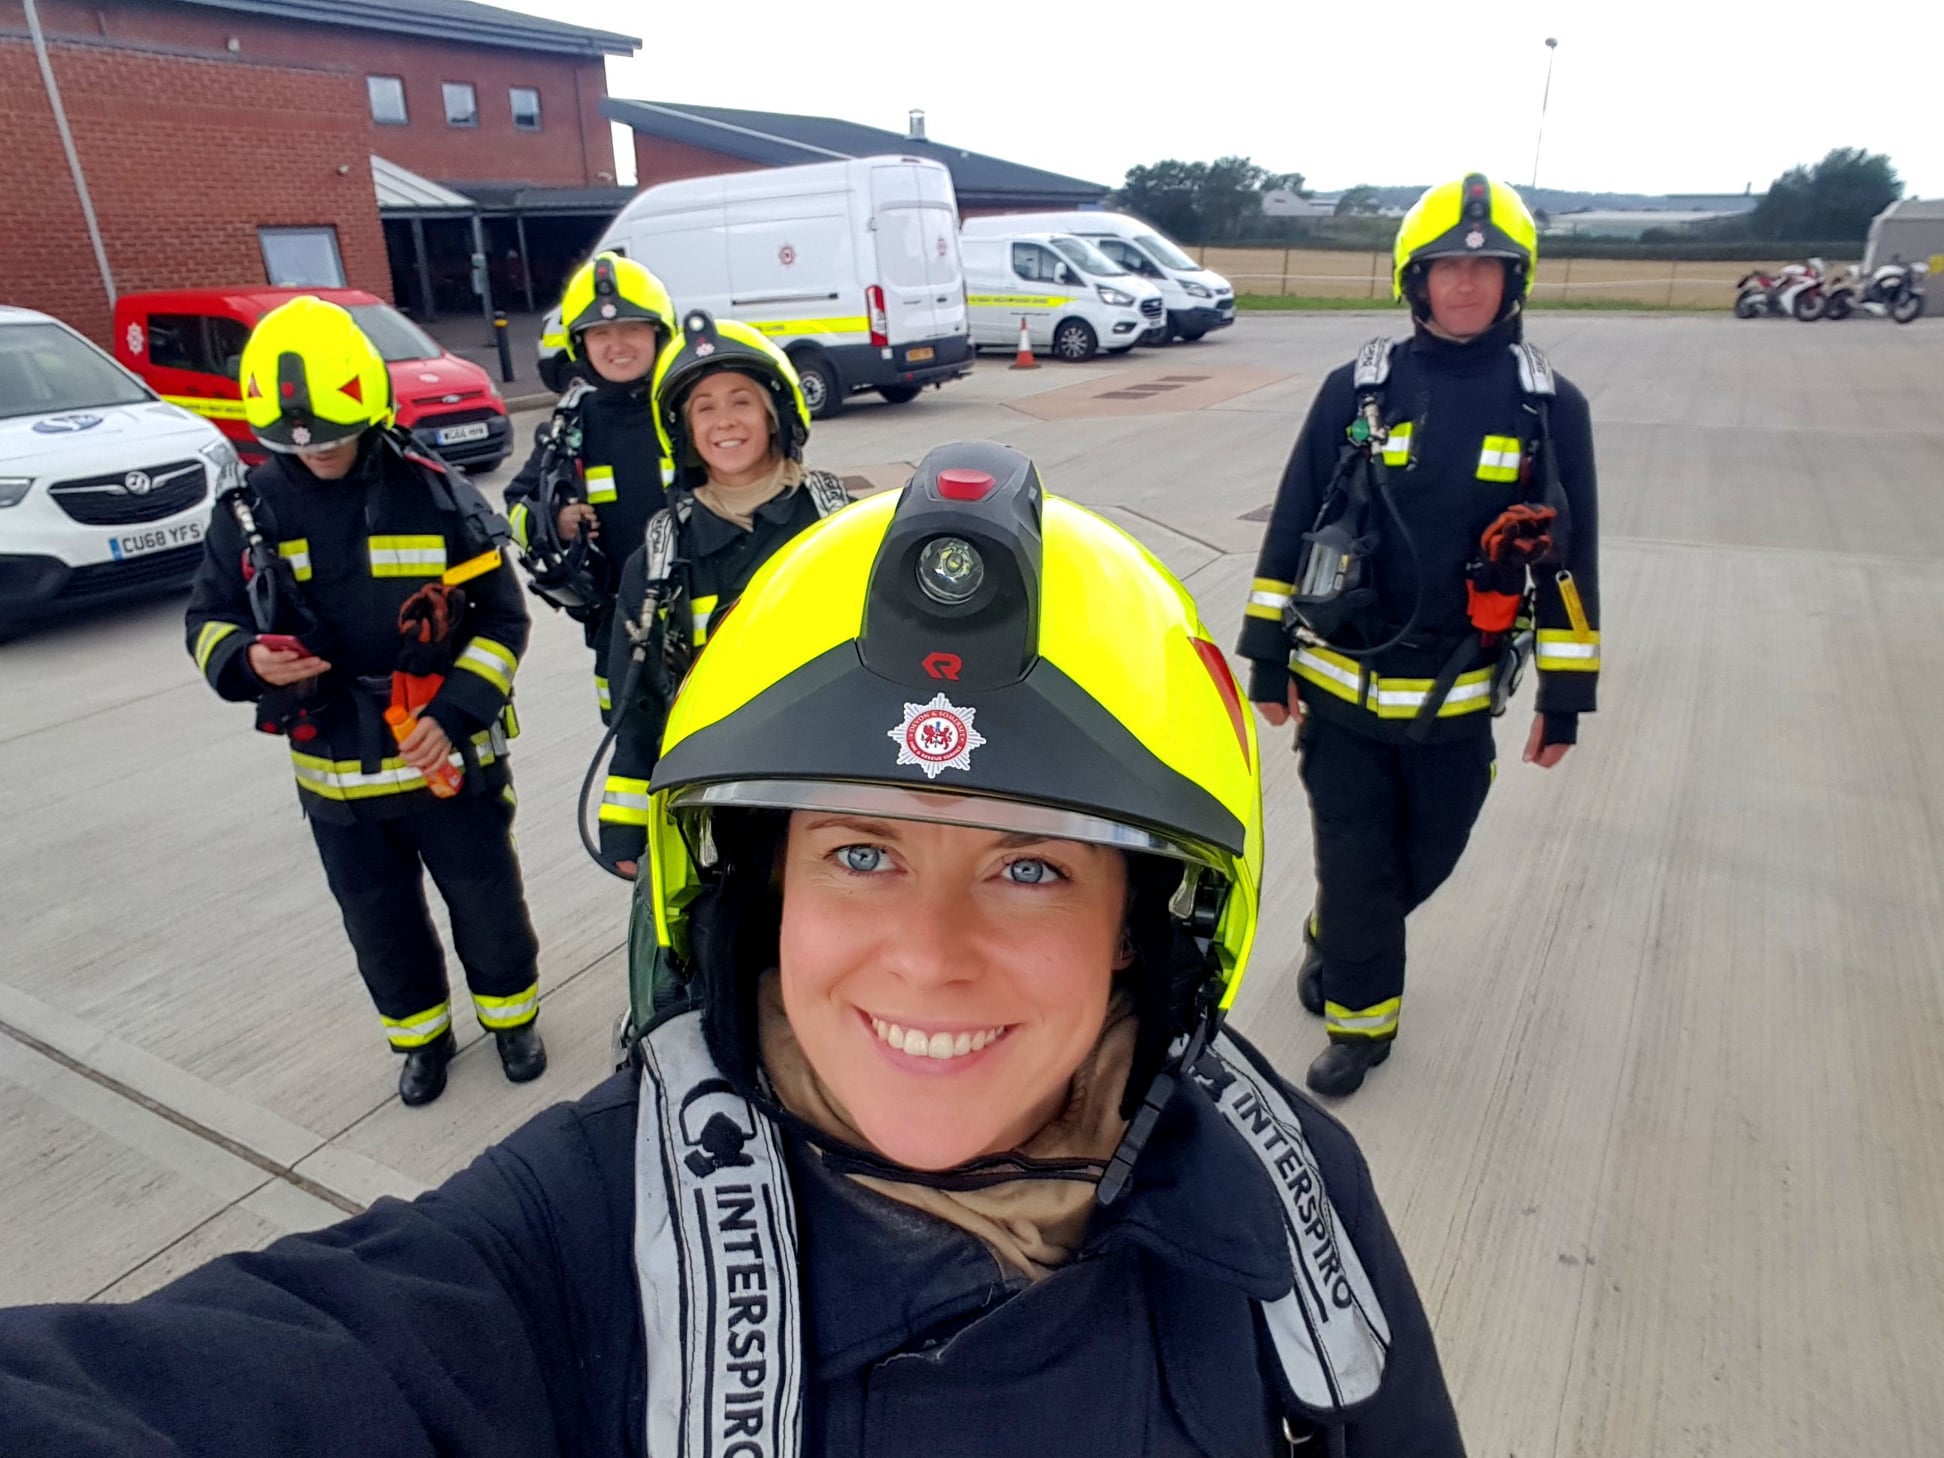 Sarka at a breathing apparatus training course